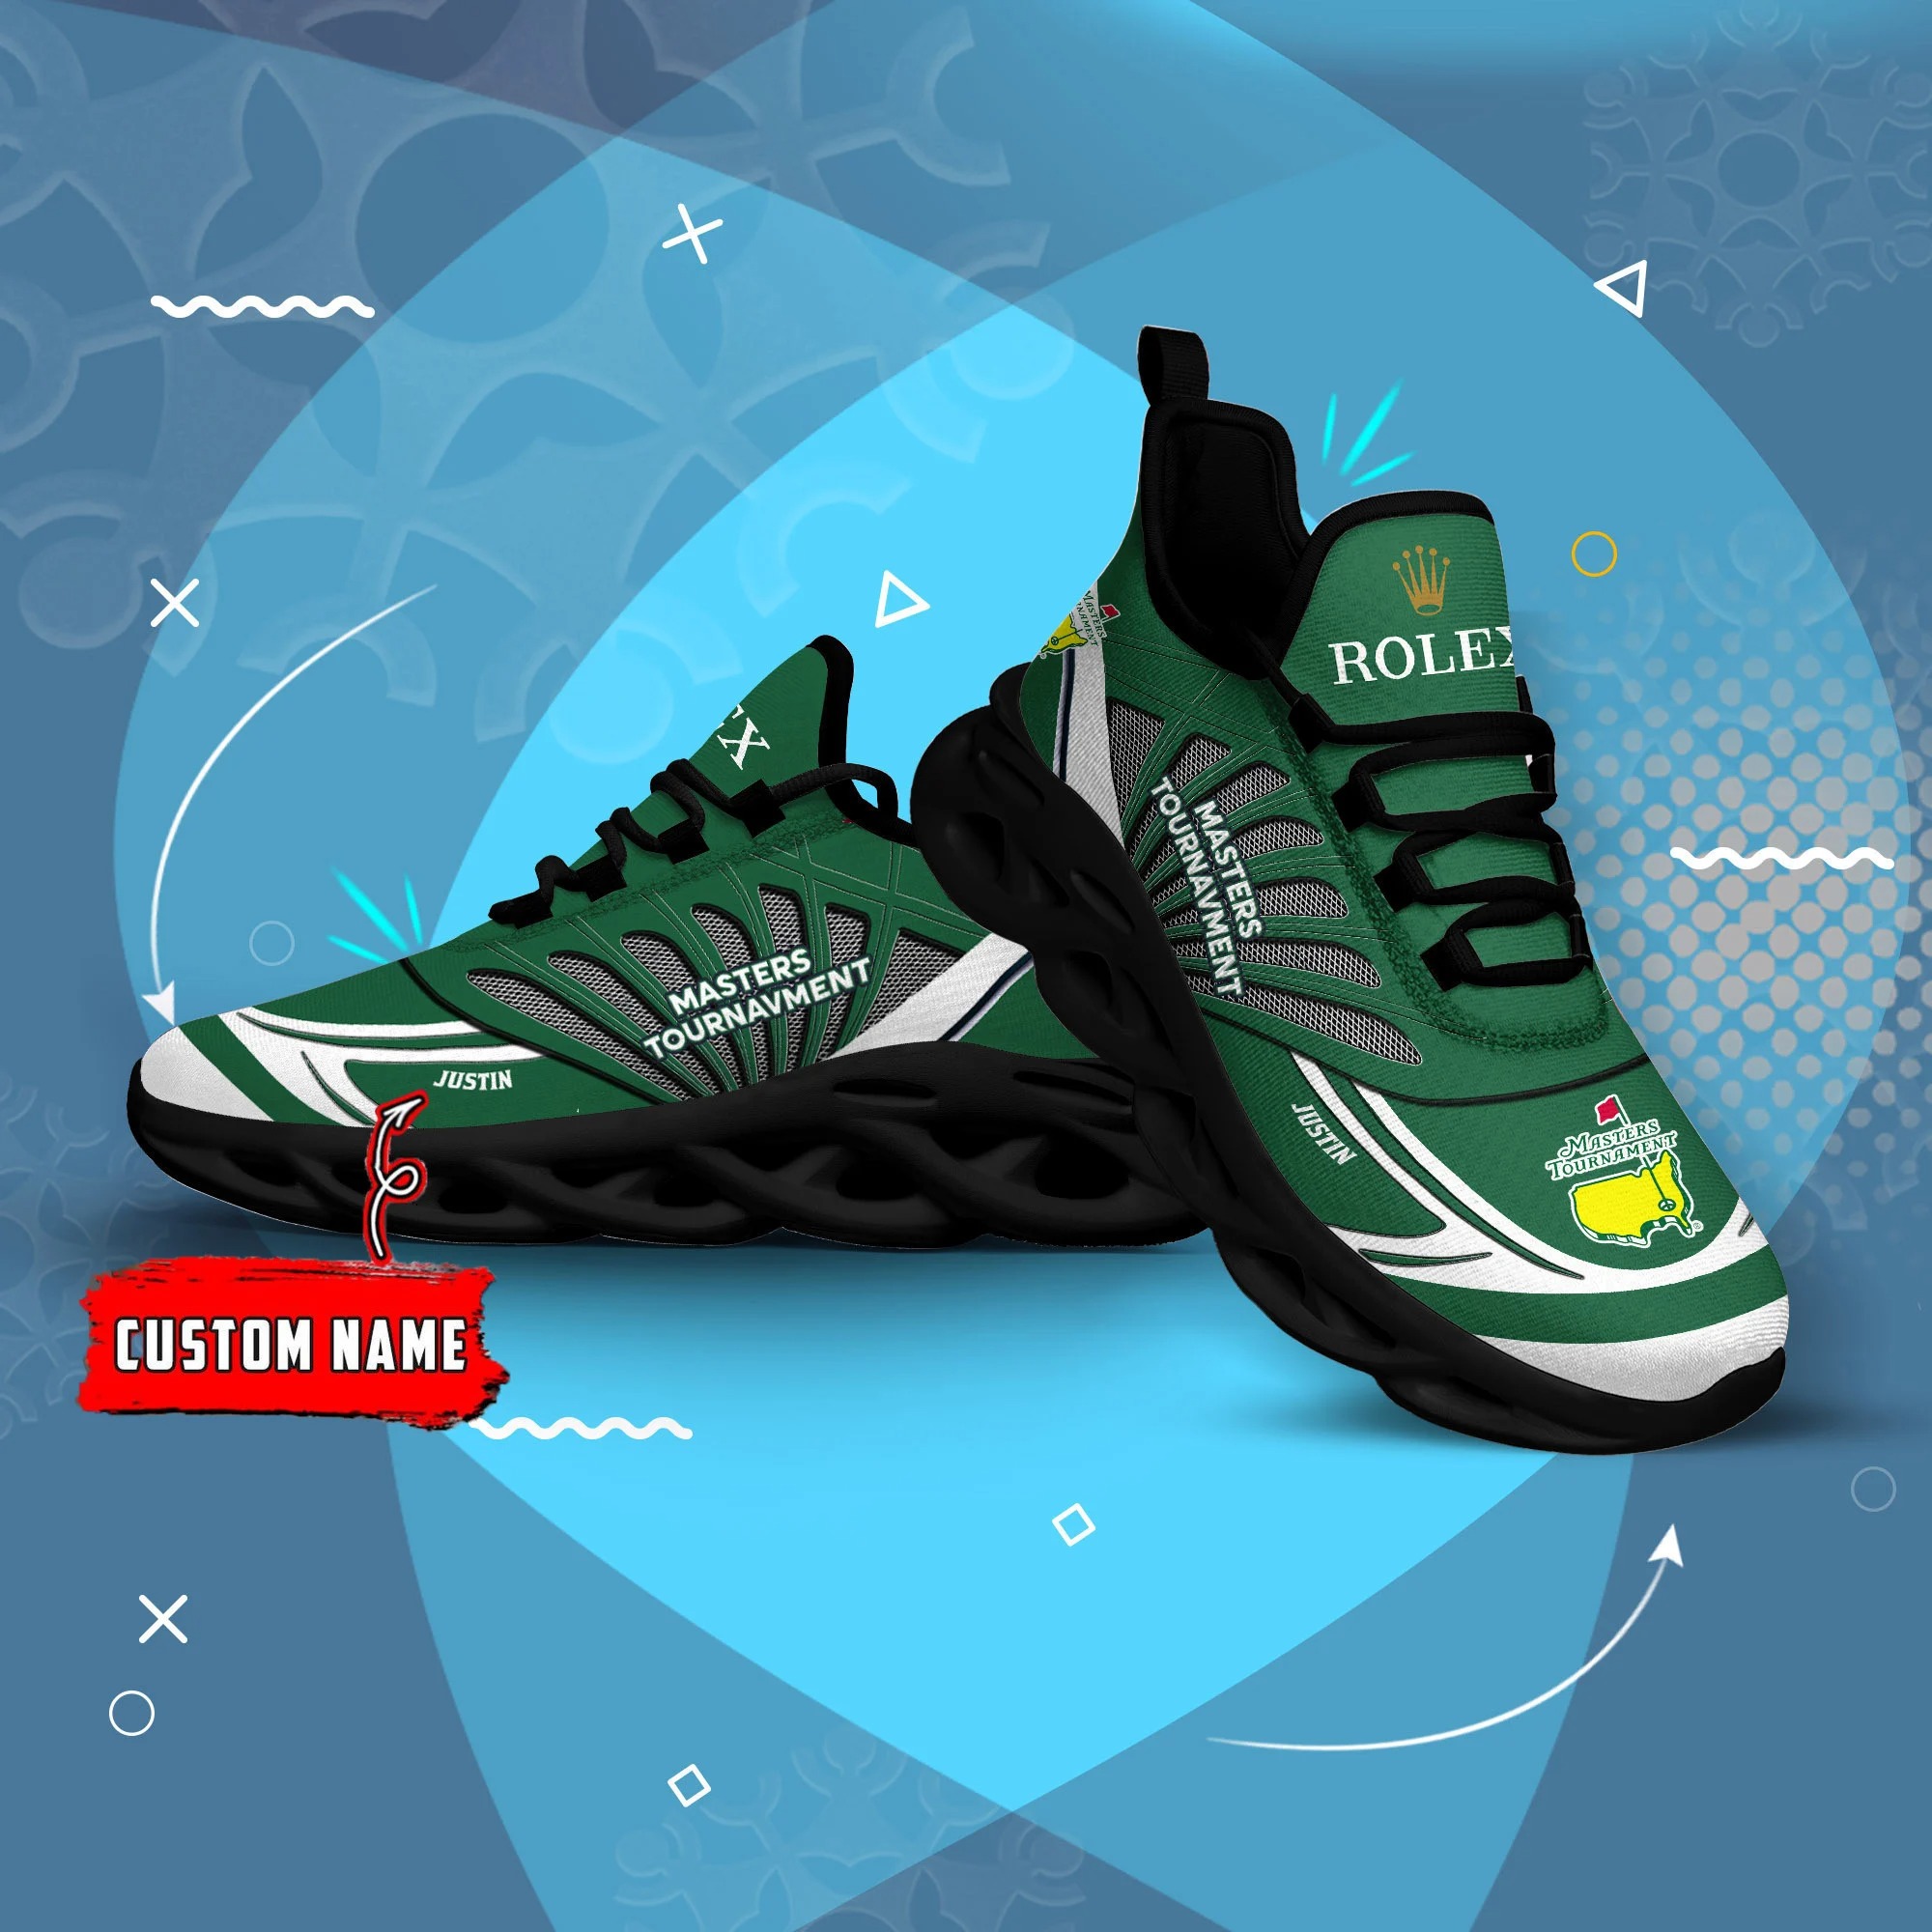 Personalized Rolex Masters Tournament Clunky Max Soul Shoes 2